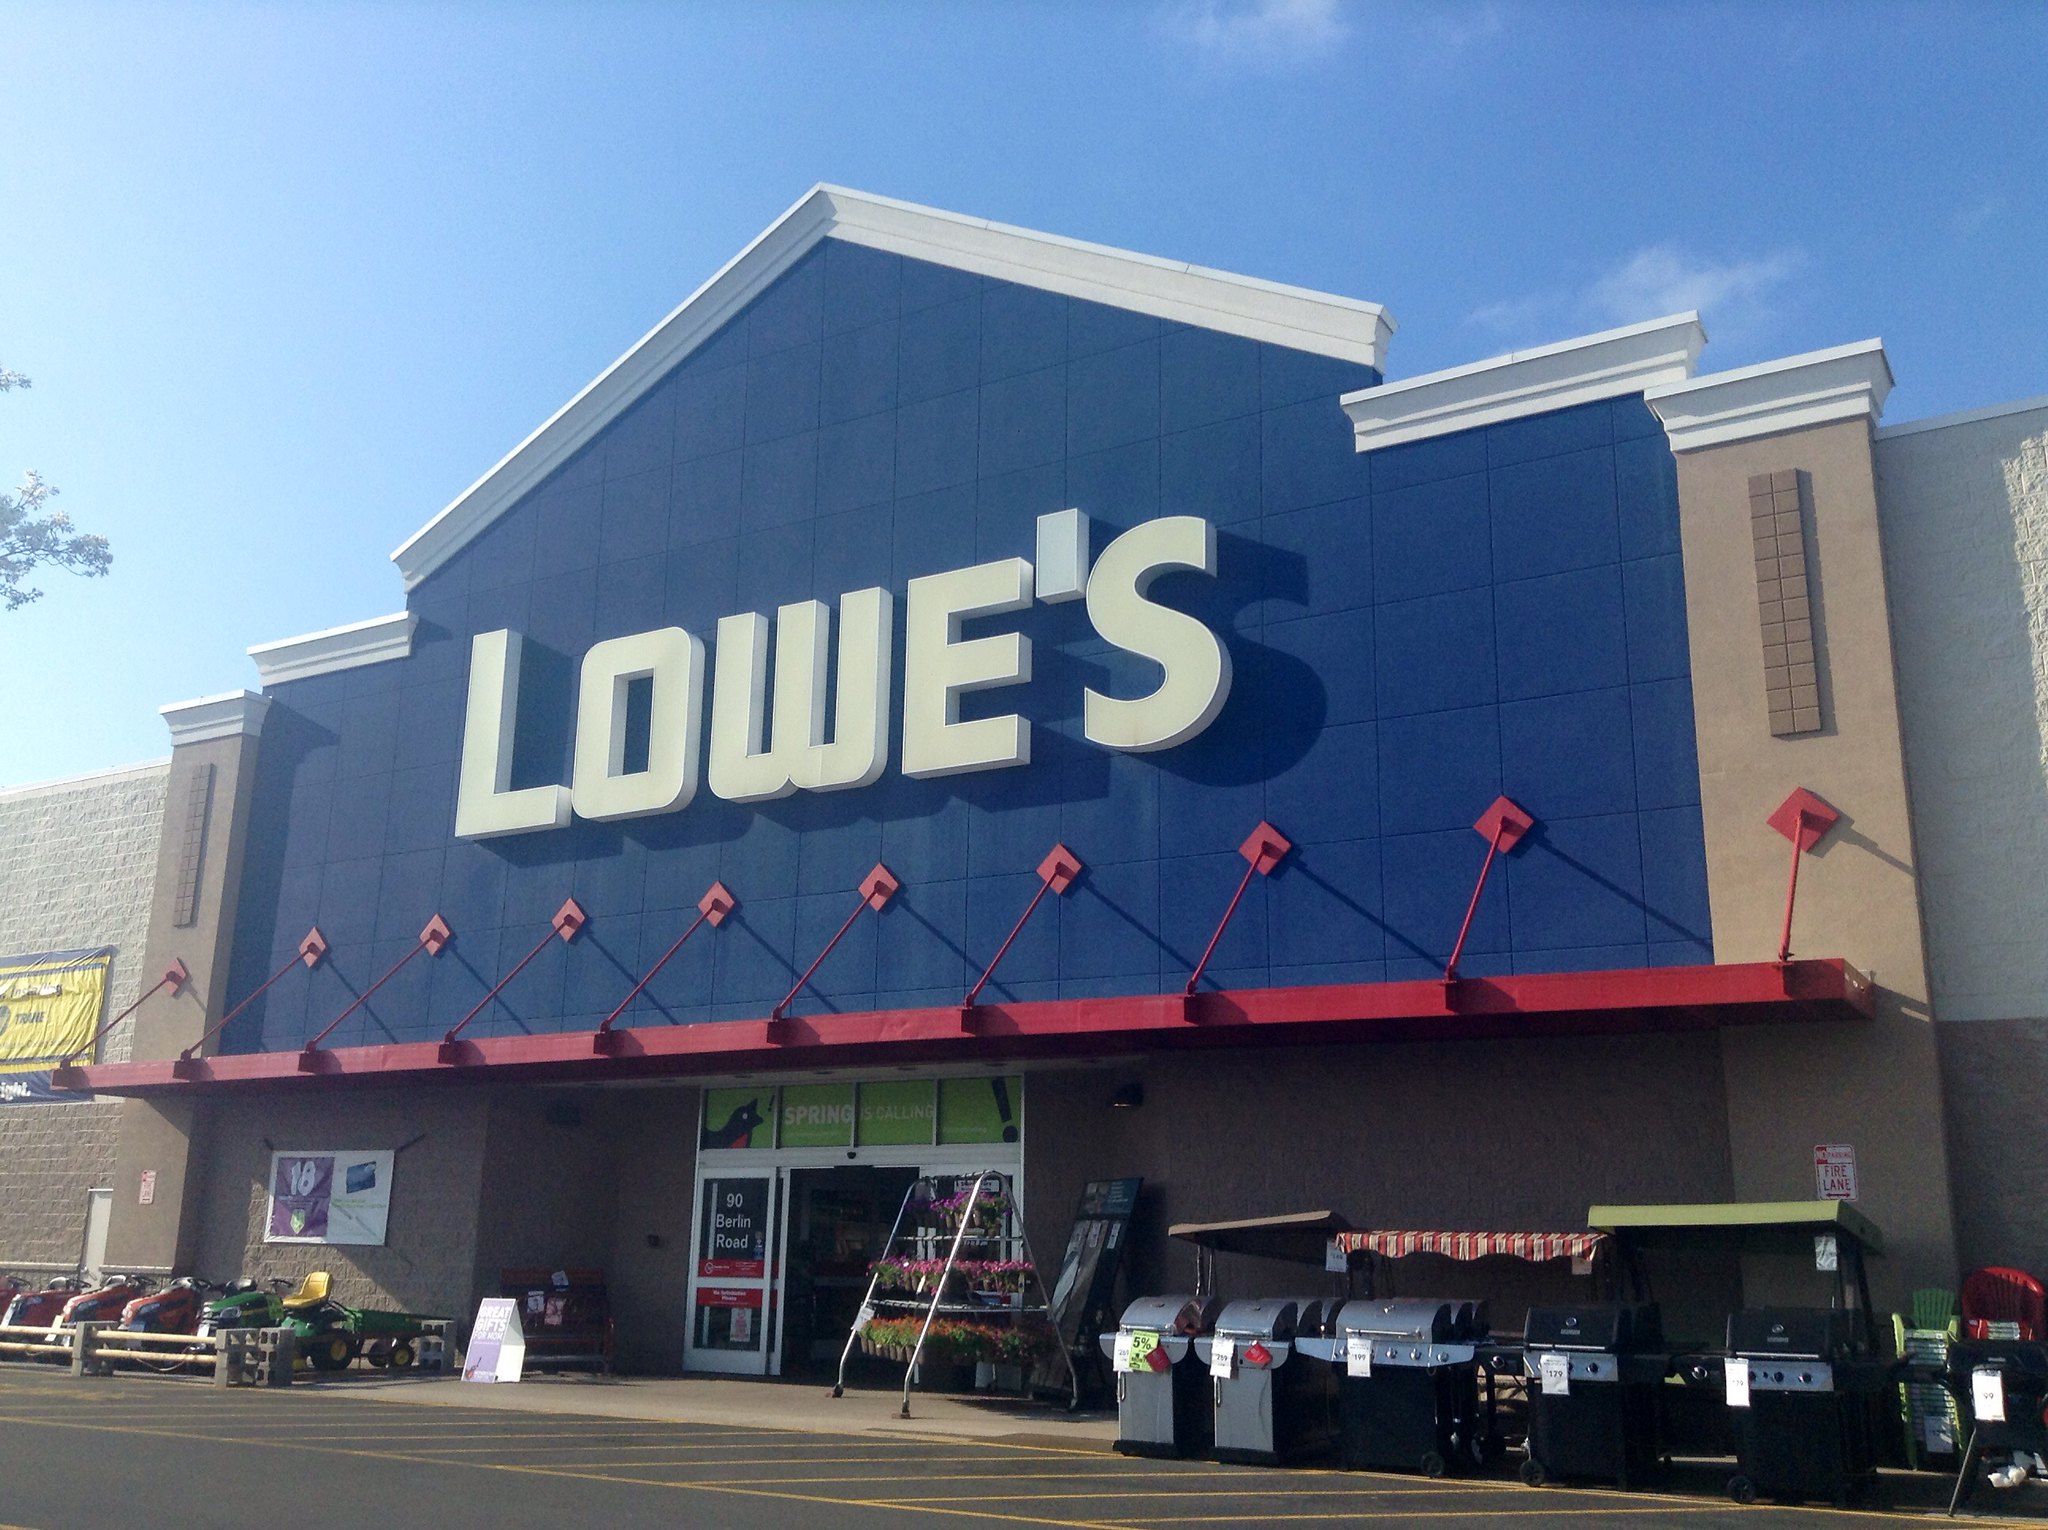 Lowe's Home Improvement Center. Lowes Store Lowe's Logo, Lowe's Sign